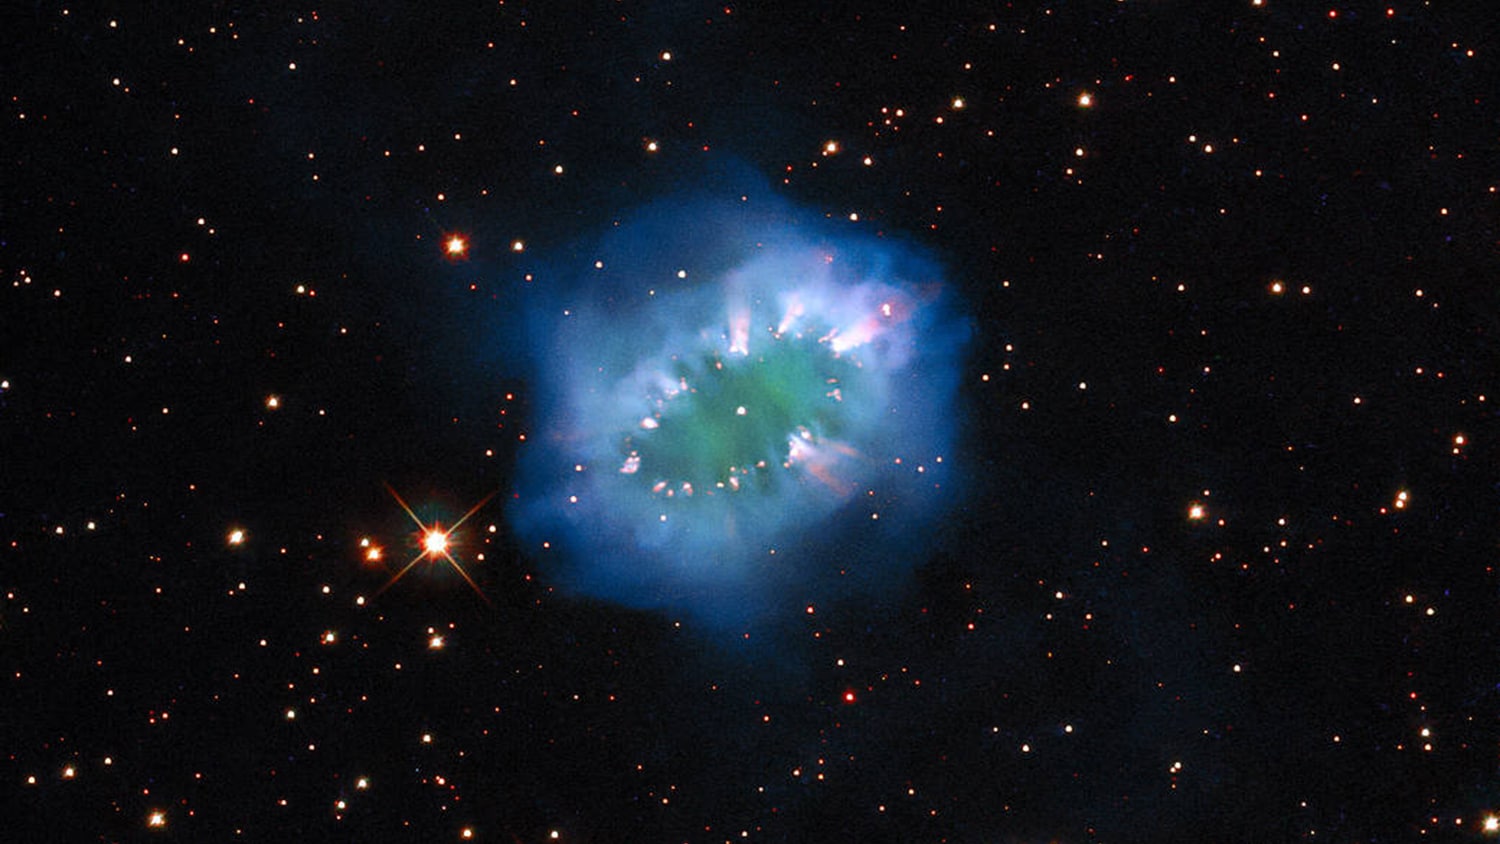 Hubble captured a view of the Necklace Nebula thumbnail